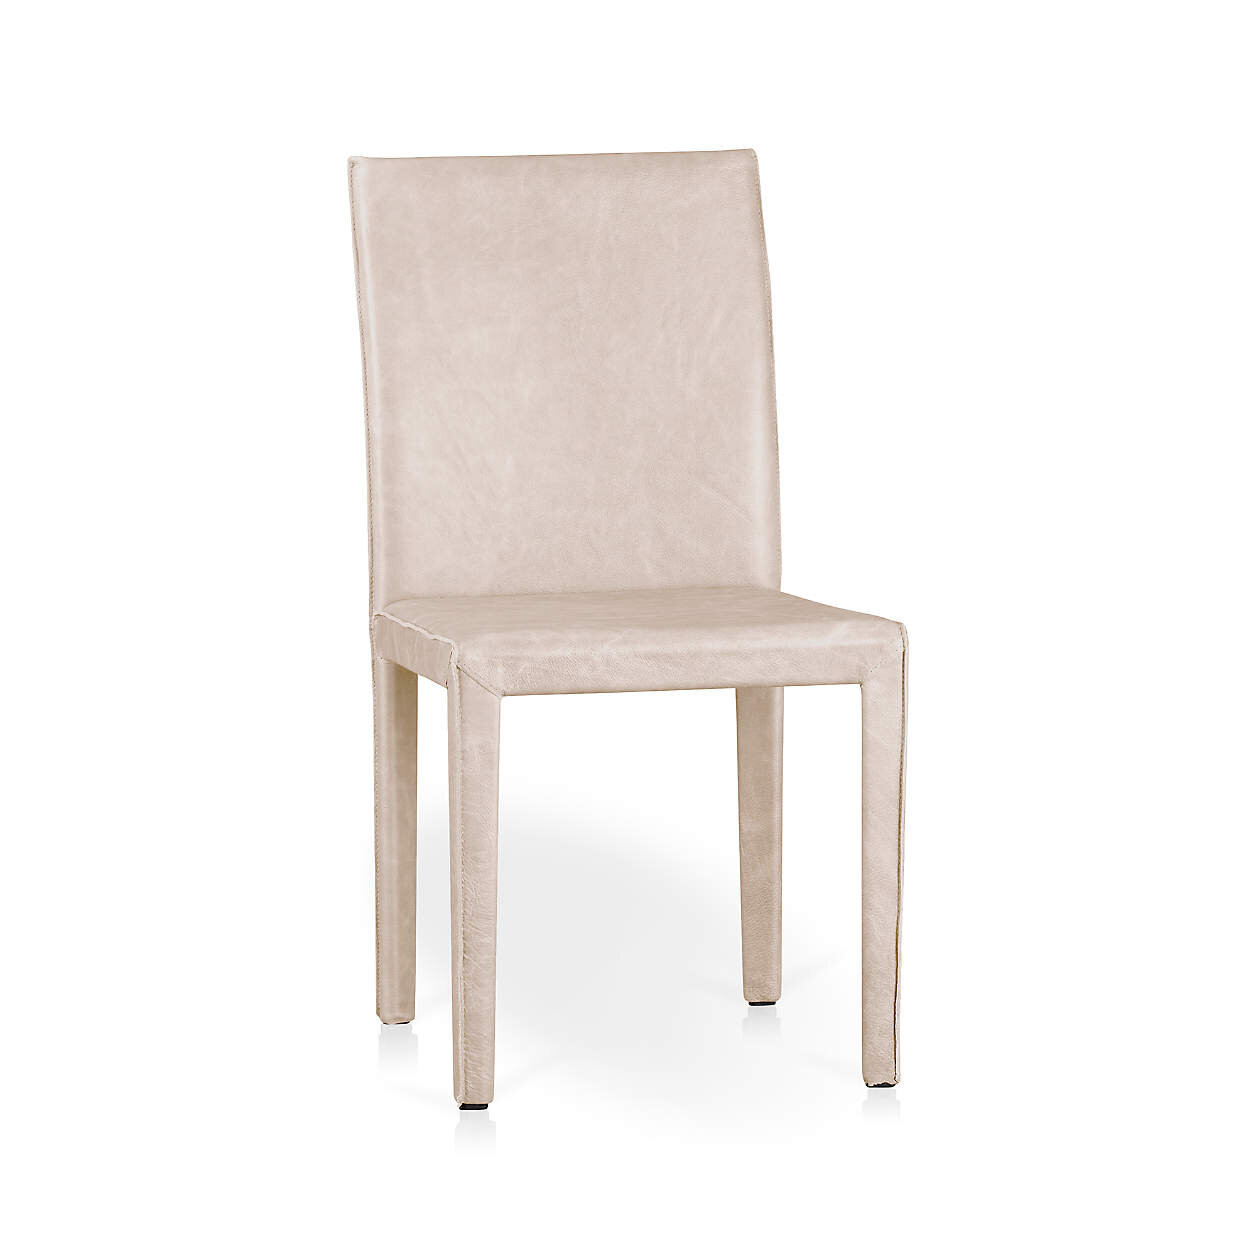 Crate &amp; Barrel - Folio Sand Top-Grain Leather Dining Chair - $399